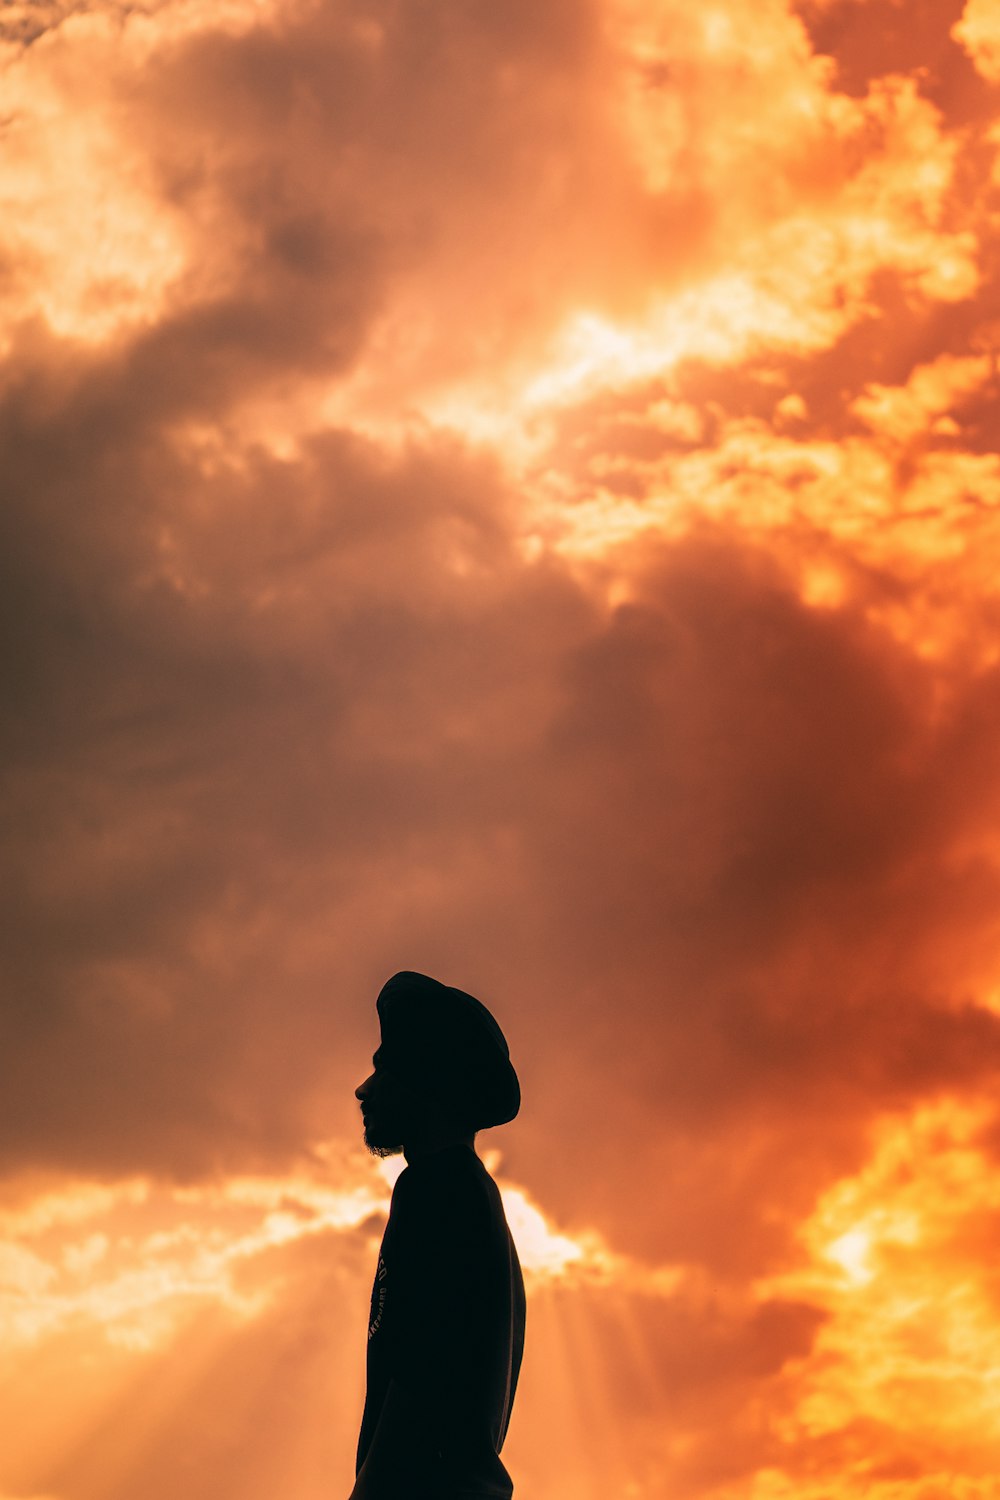 a silhouette of a person standing under a cloudy sky